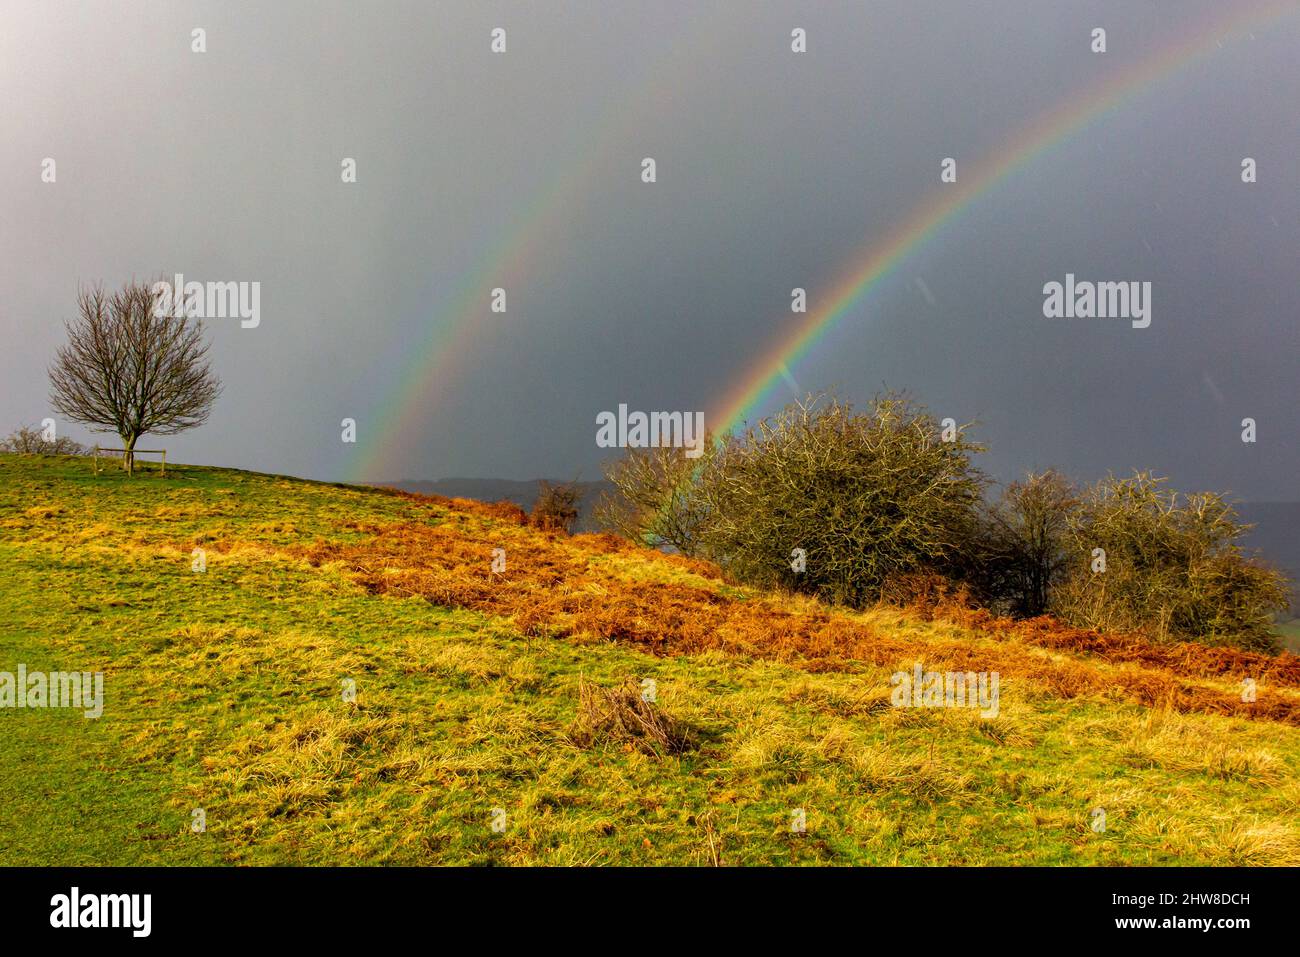 Rainbow and dark sky with rolling countryside near Oaker in the Derbyshire Dales area of the Peak District National Park, Derbyshire, England, UK Stock Photo